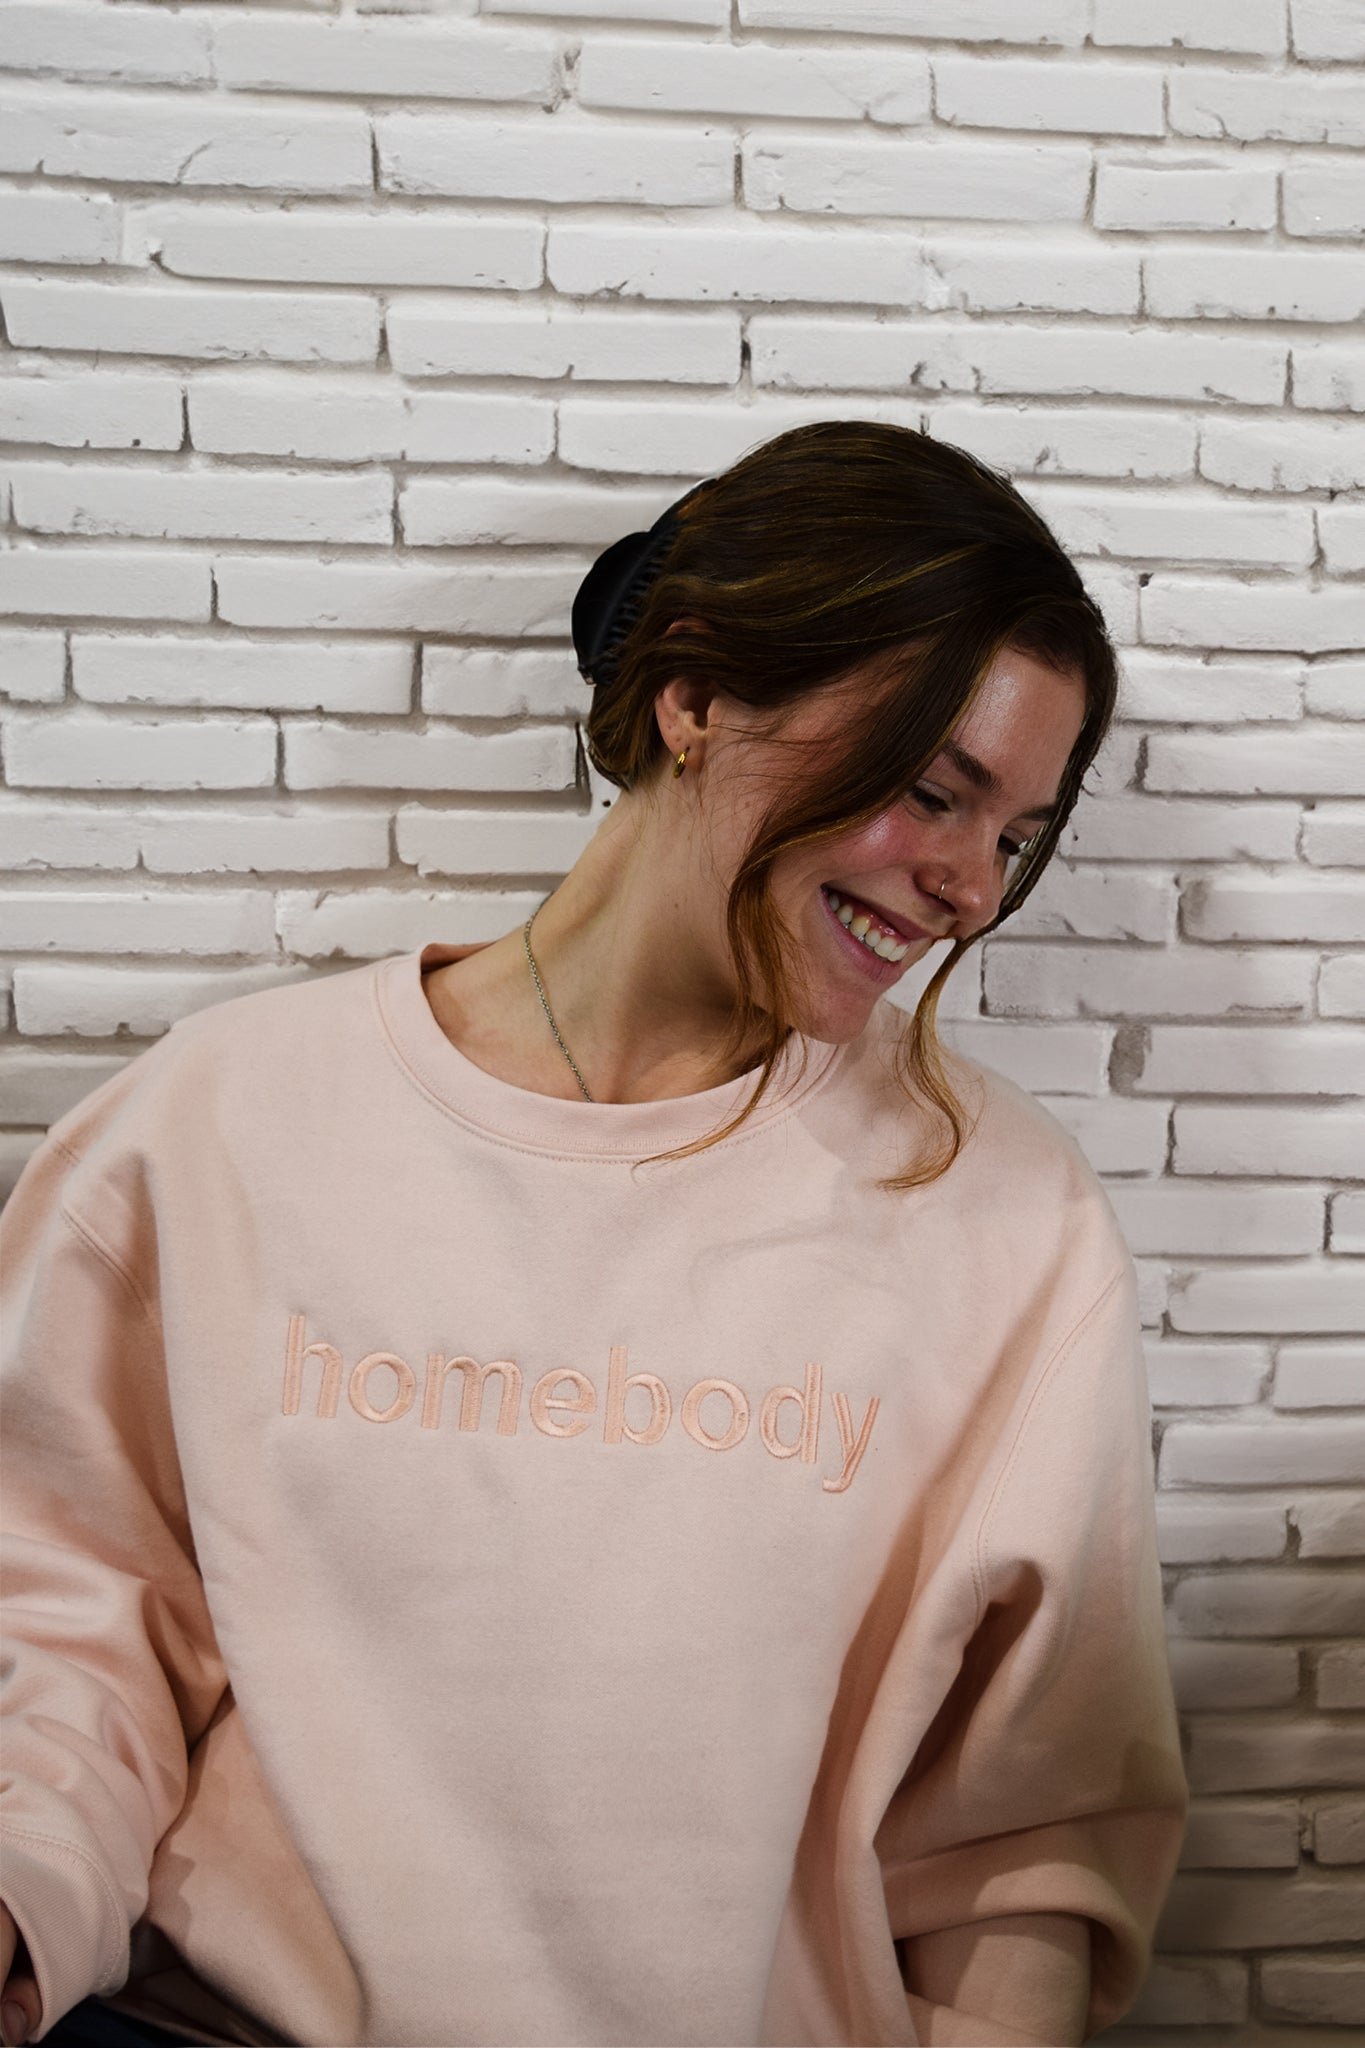 HOMEBODY EMBROIDERED SWEATER (MULTI COLORS)